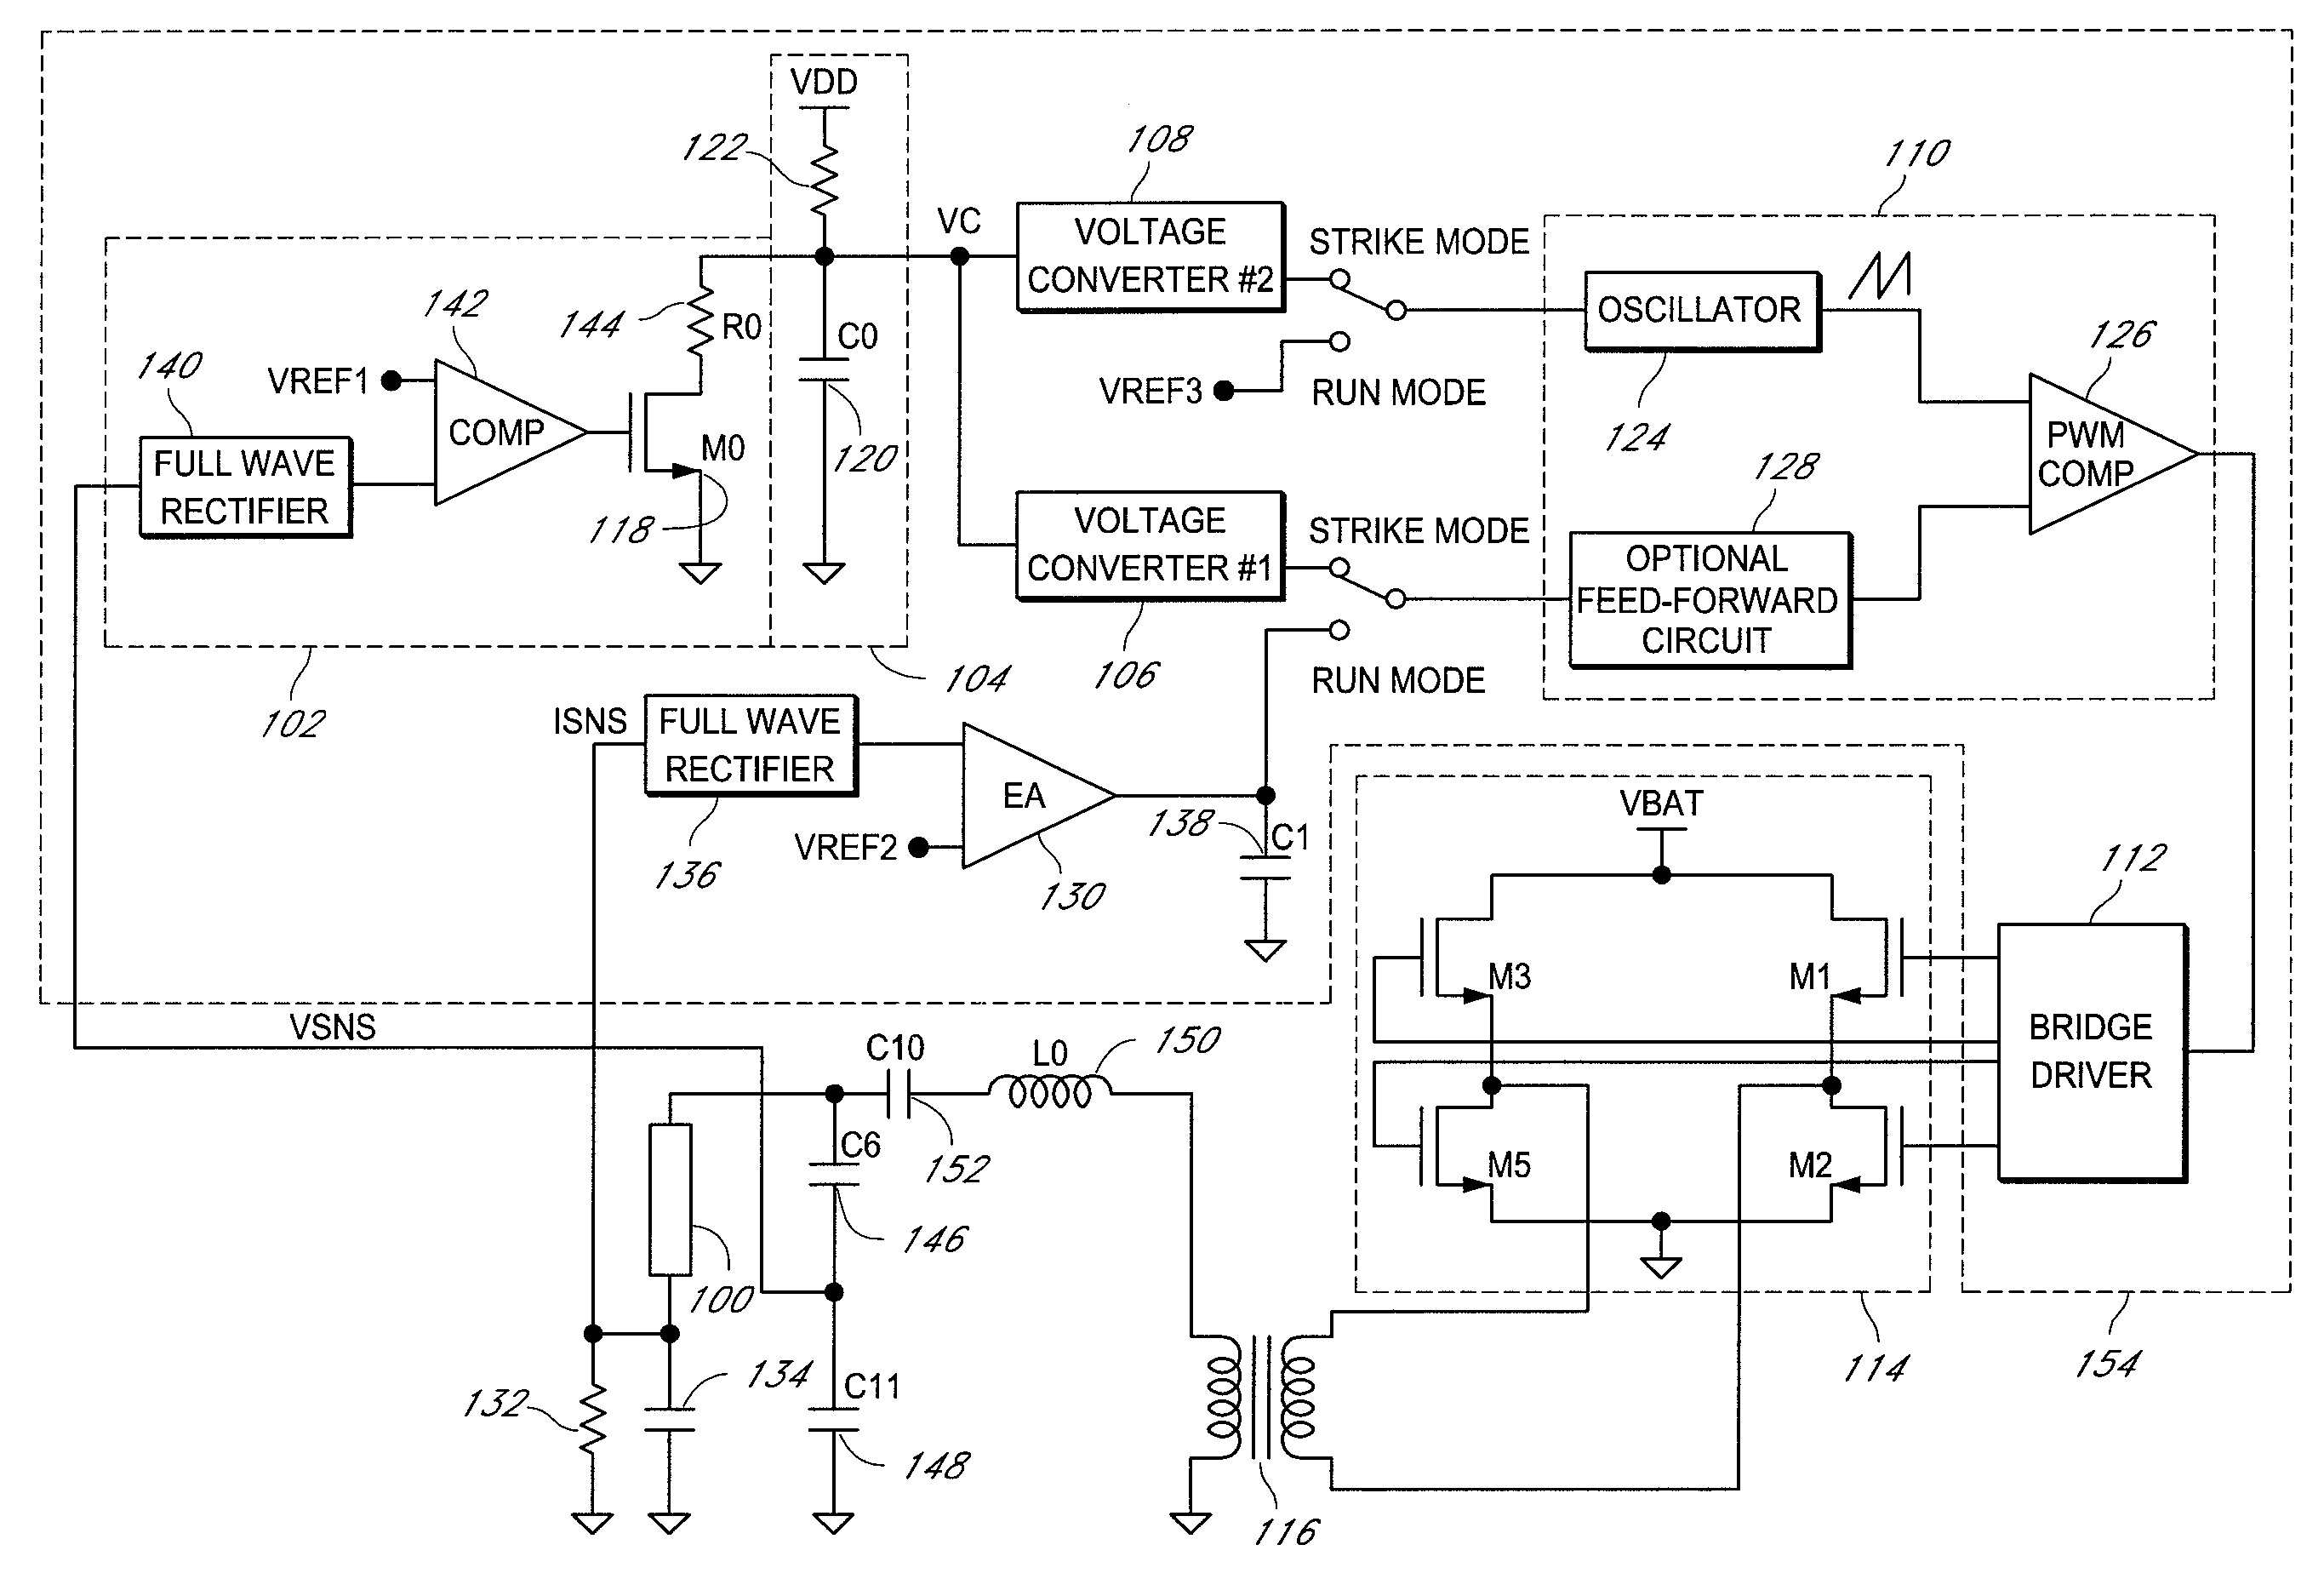 Striking and open lamp regulation for CCFL controller